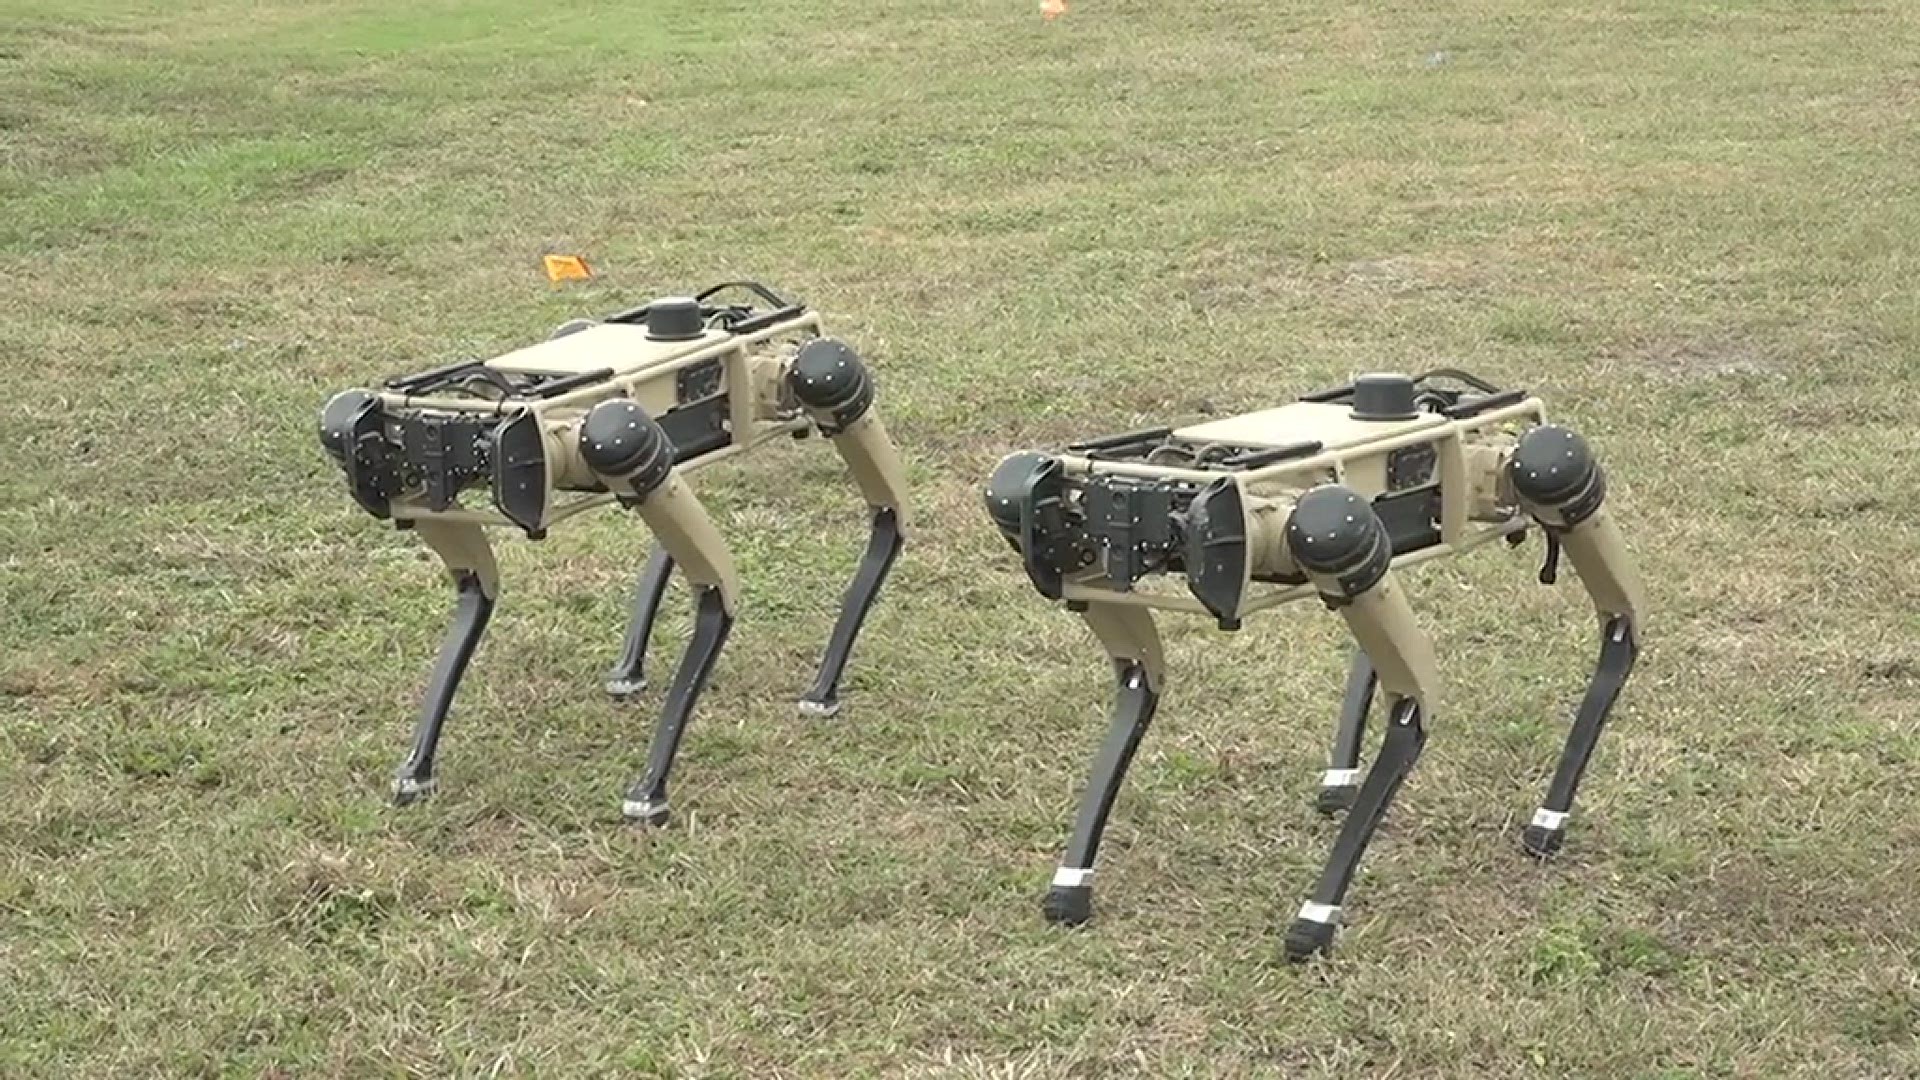 Though they look nothing like Lassie, these robot dogs can be life-saving.